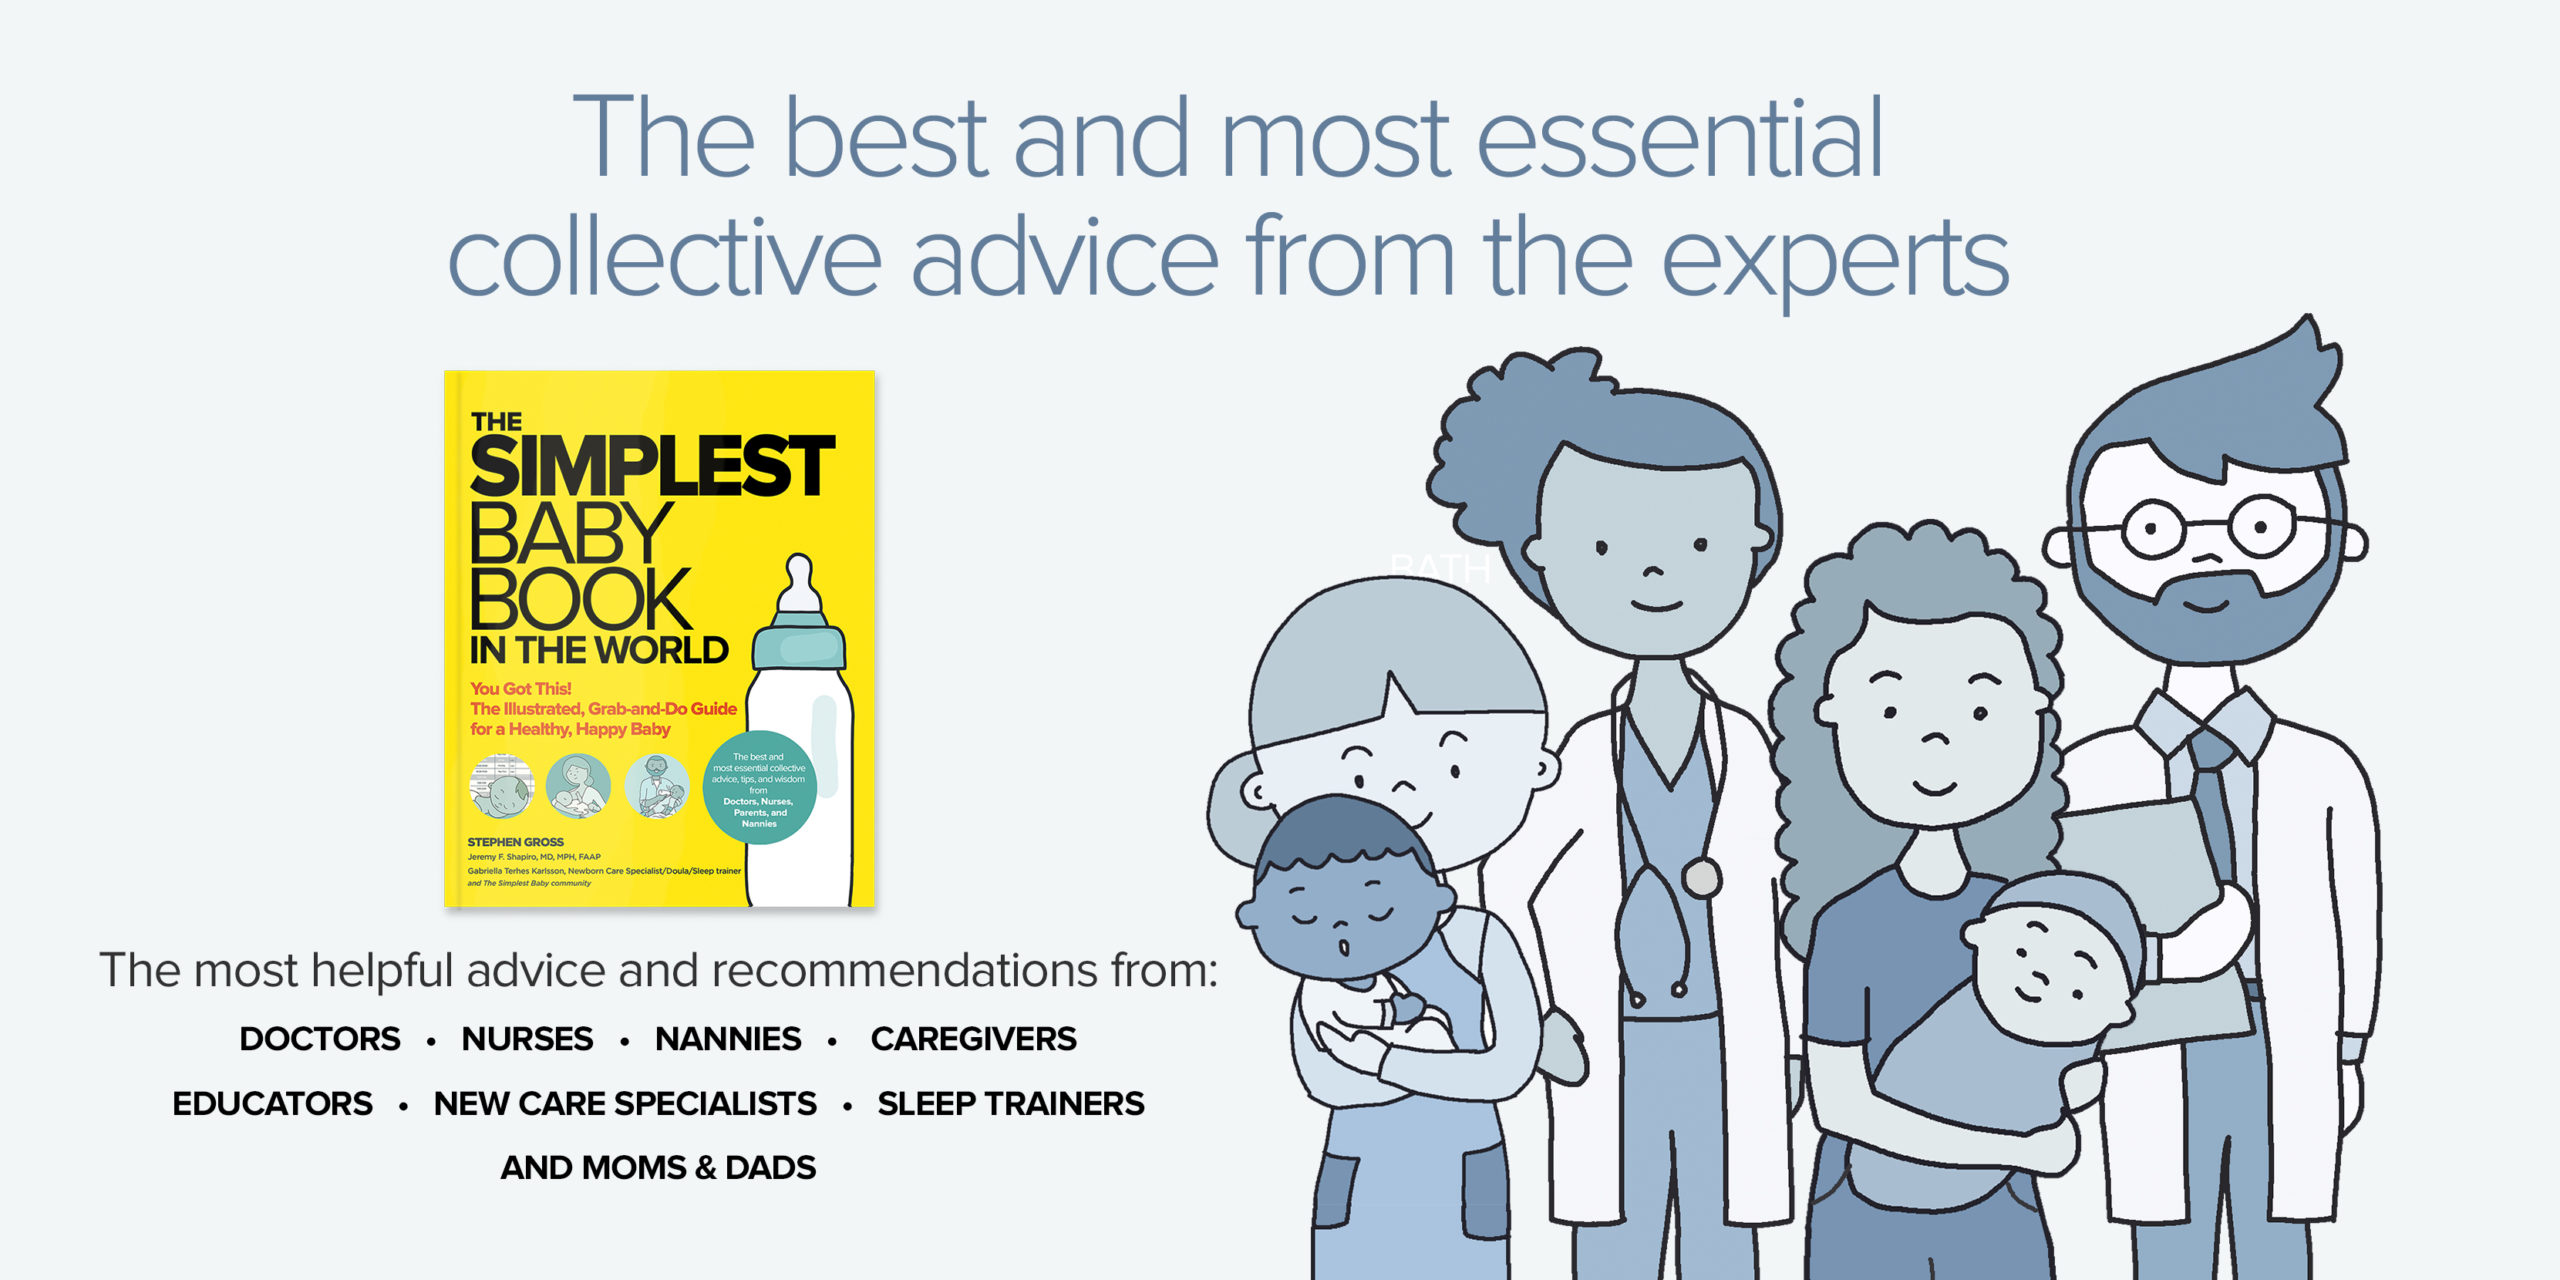 The best and most essential collective advice from the experts: The most helpful advice and recommendations from: doctors, nurses, nannies, caregivers, educators, new care specialists, sleep trainers, and moms & dads